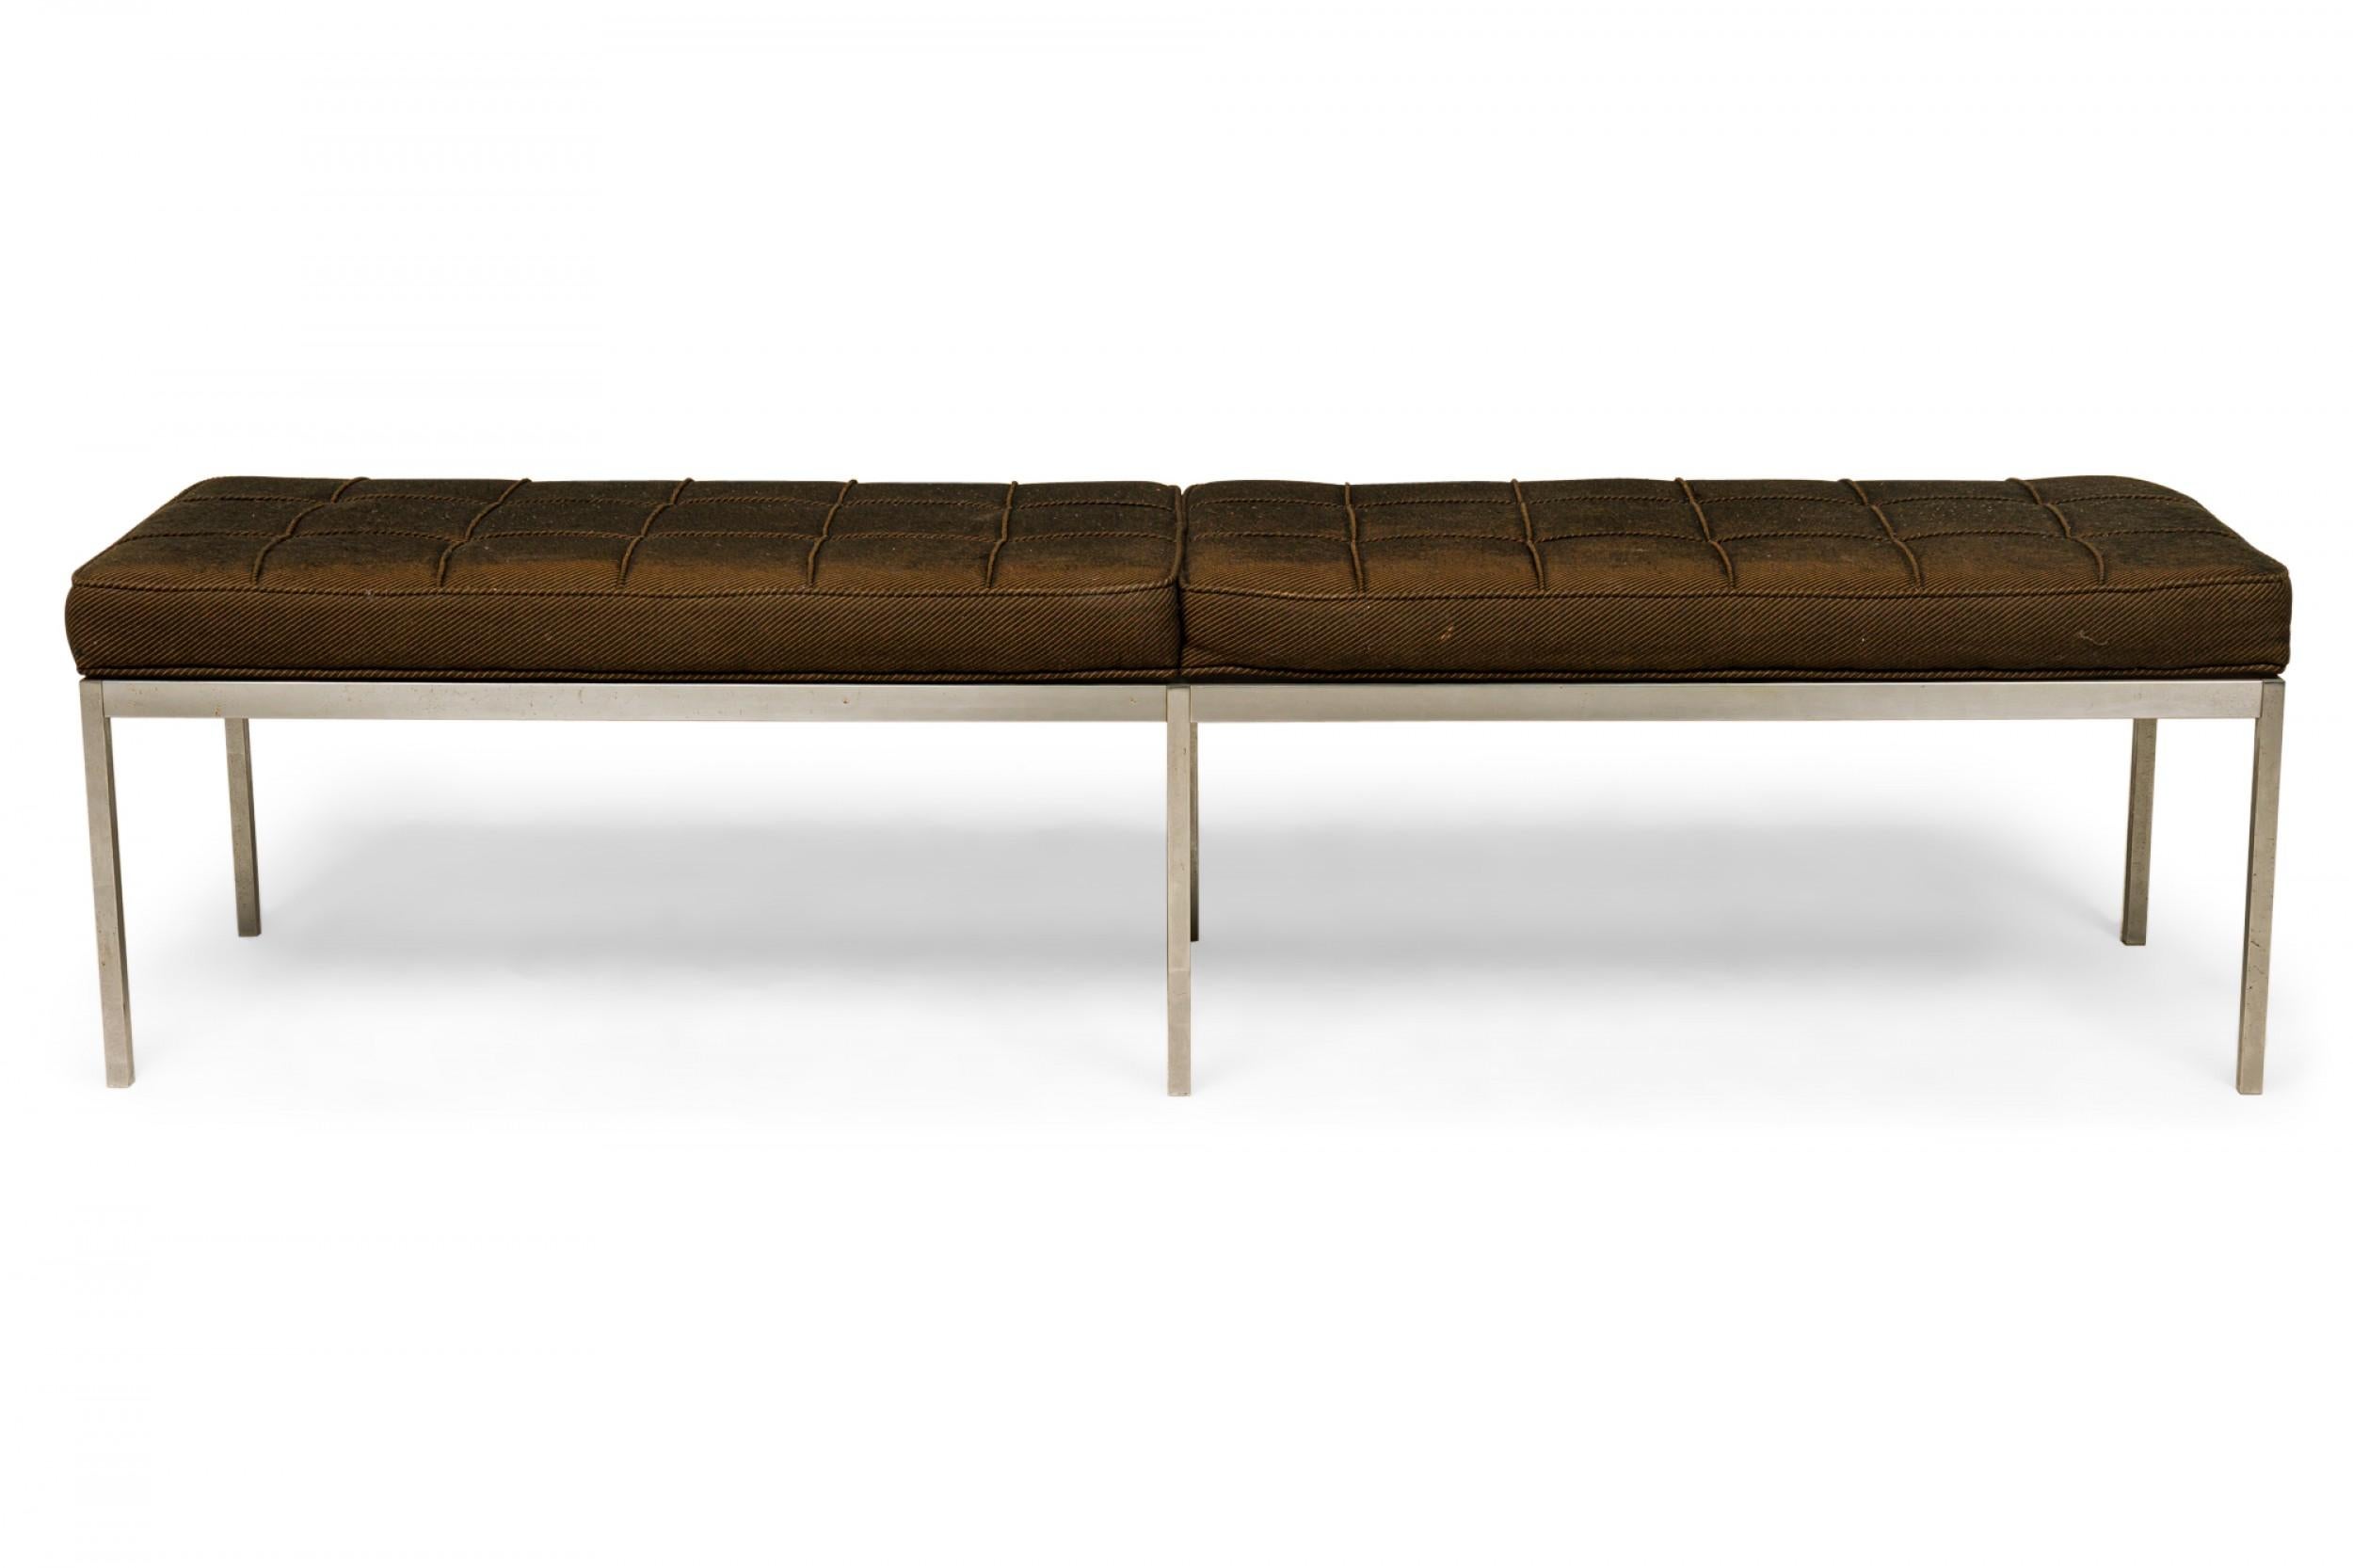 American Mid-Century rectangular museum bench with a brown fabric upholstered square channeled seat resting on a square chrome tube frame. (FLORENCE KNOLL FOR KNOLL INTERNATIONAL).
 